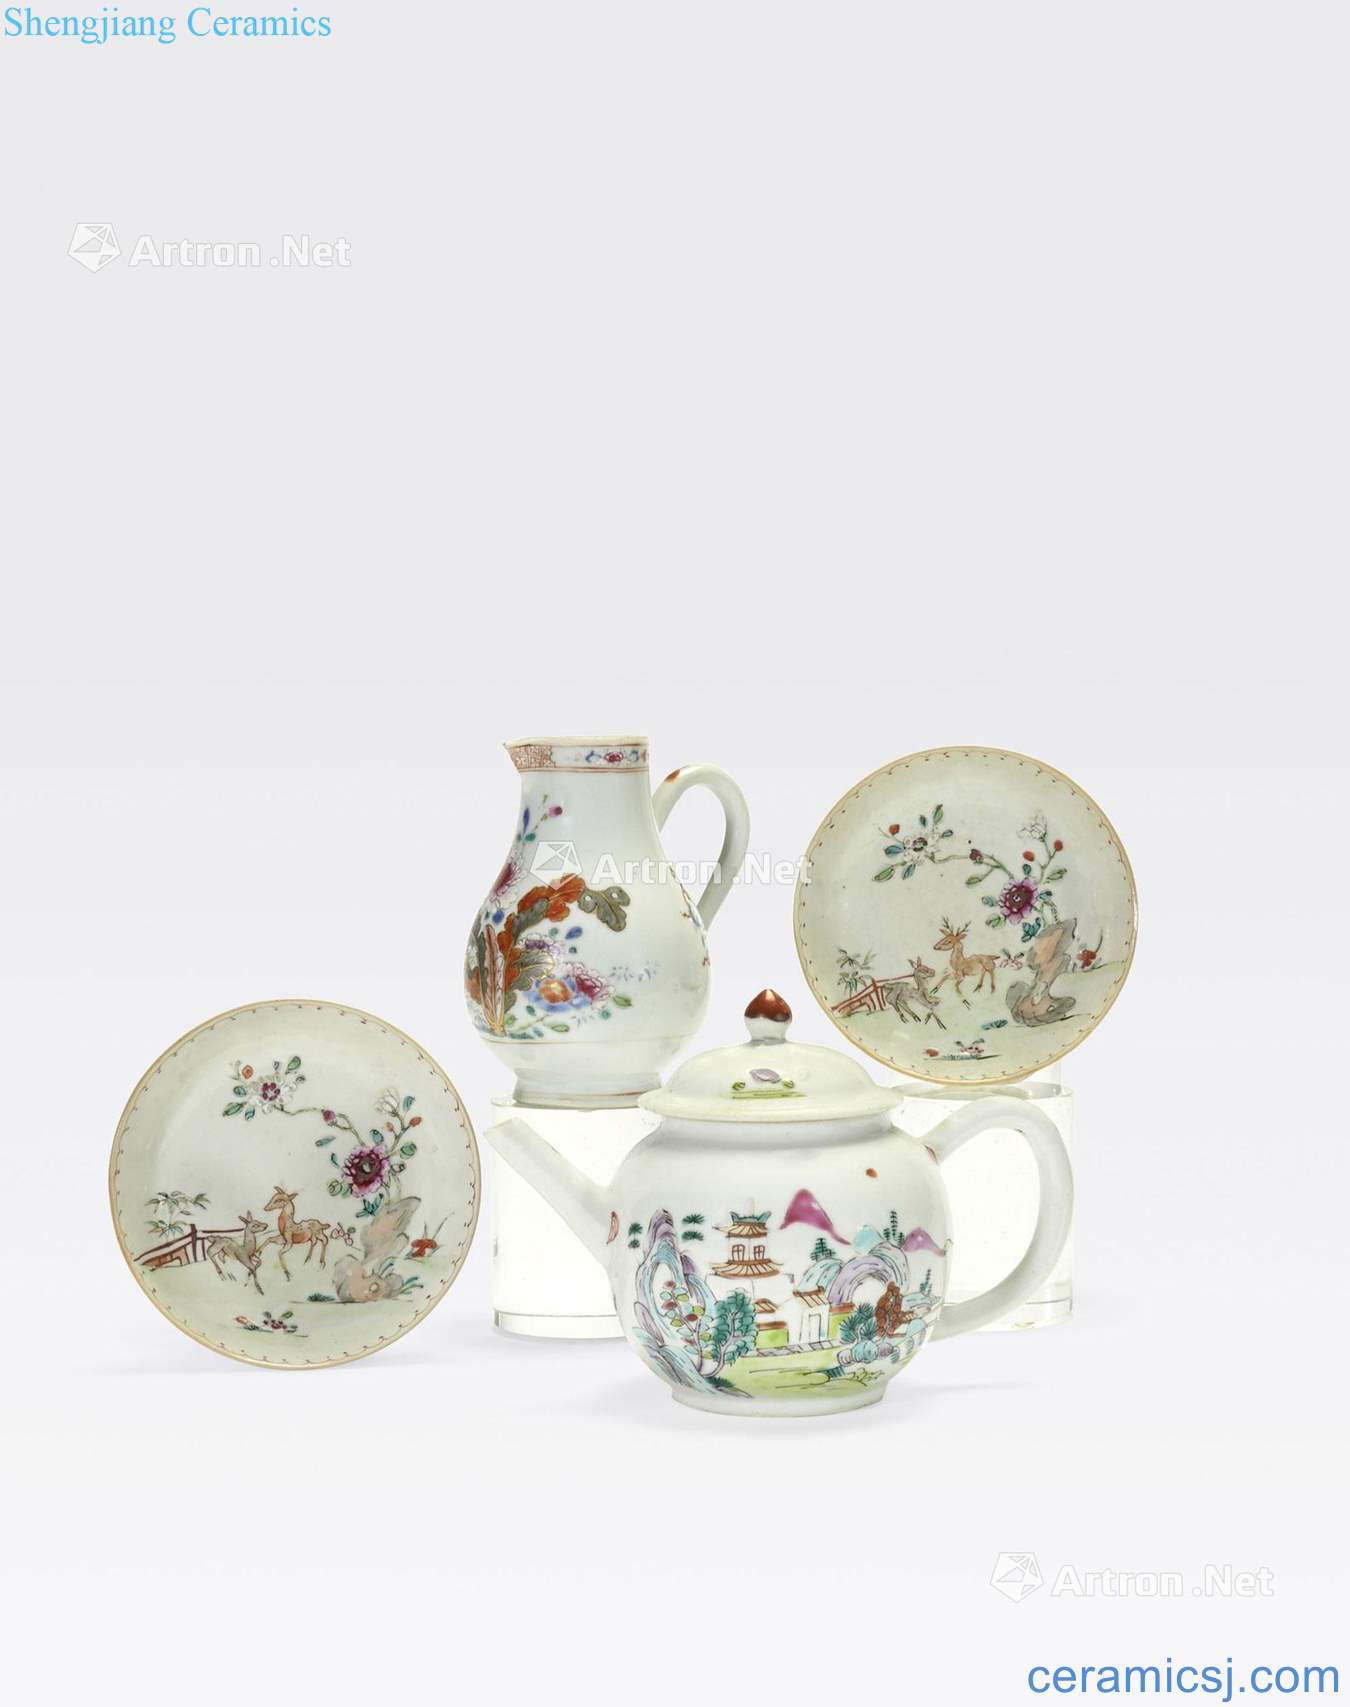 The 19 th century A GROUP OF FOUR FAMILLE ROSE ENAMELED TEA ITEMS